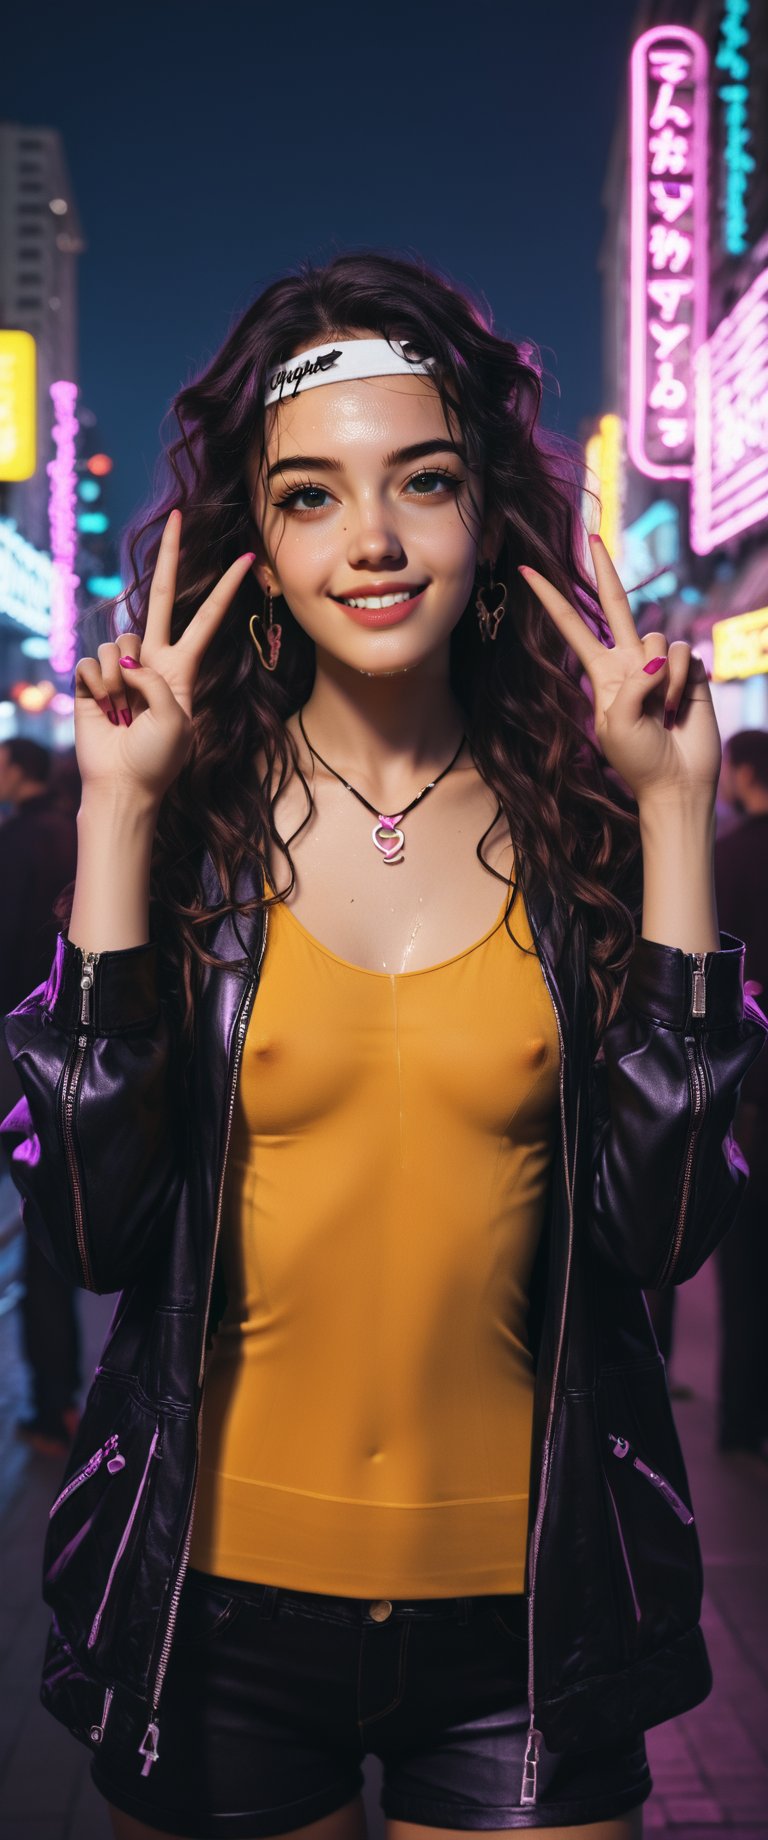 In a vibrant, neon-lit cityscape, a young woman with long, wavy hair and a mischievous grin, stands confidently amidst the urban night. She wears a black vinyl jacket, adorned with chunky chains and a collar of tiny tachuelas. Her white headband is tied around her forehead, holding back her wet locks. A DRONE 26K inscribed yellow tank top clings to her toned physique.

As she proudly holds up her hand in a V sign near her face, two purple hearts are painted on her cheeks, matching the playful tone of her outstretched tongue. Her large, rounded pink earrings bounce with each subtle movement.

The city's towering skyscrapers and bustling streets provide a futuristic backdrop, with neon lights reflecting off the wet pavement. The atmosphere is electric, capturing the carefree essence of this rebellious cyberpunk heroine, standing tall and unapologetic in her freedom and joy.,score_9,ct-virtual,ct-jeniiii